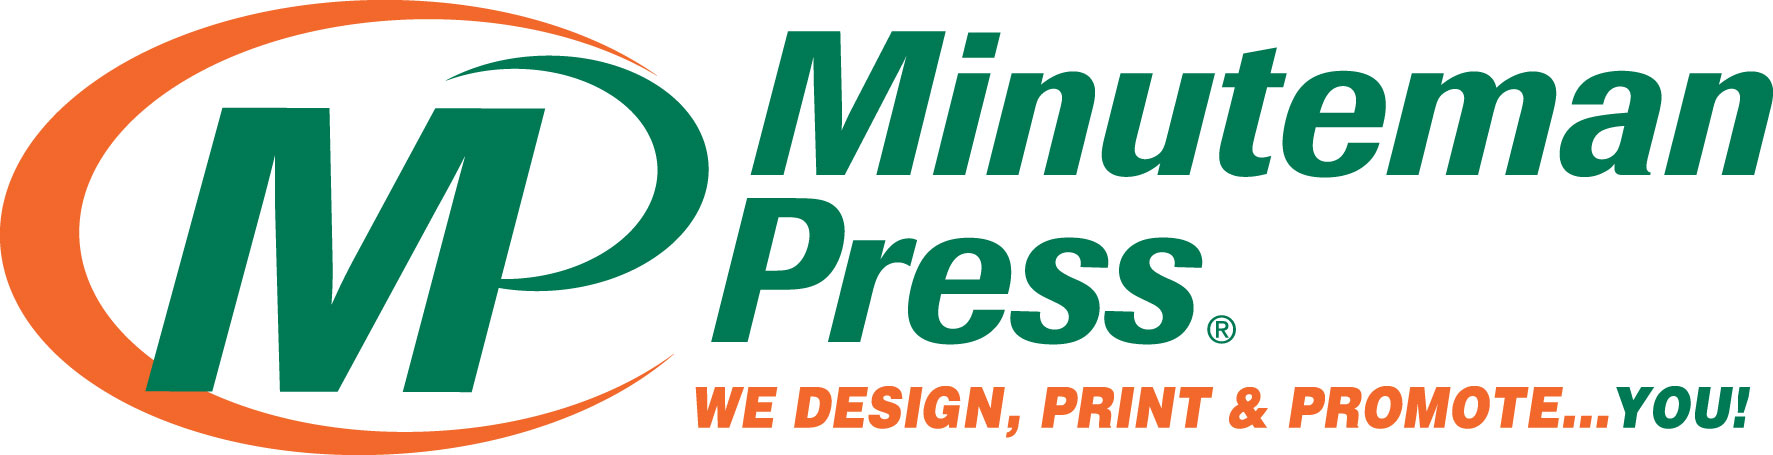 Minuteman Press franchise locations offer a wide range of creative design, digital printing and marketing services to businesses and clients.